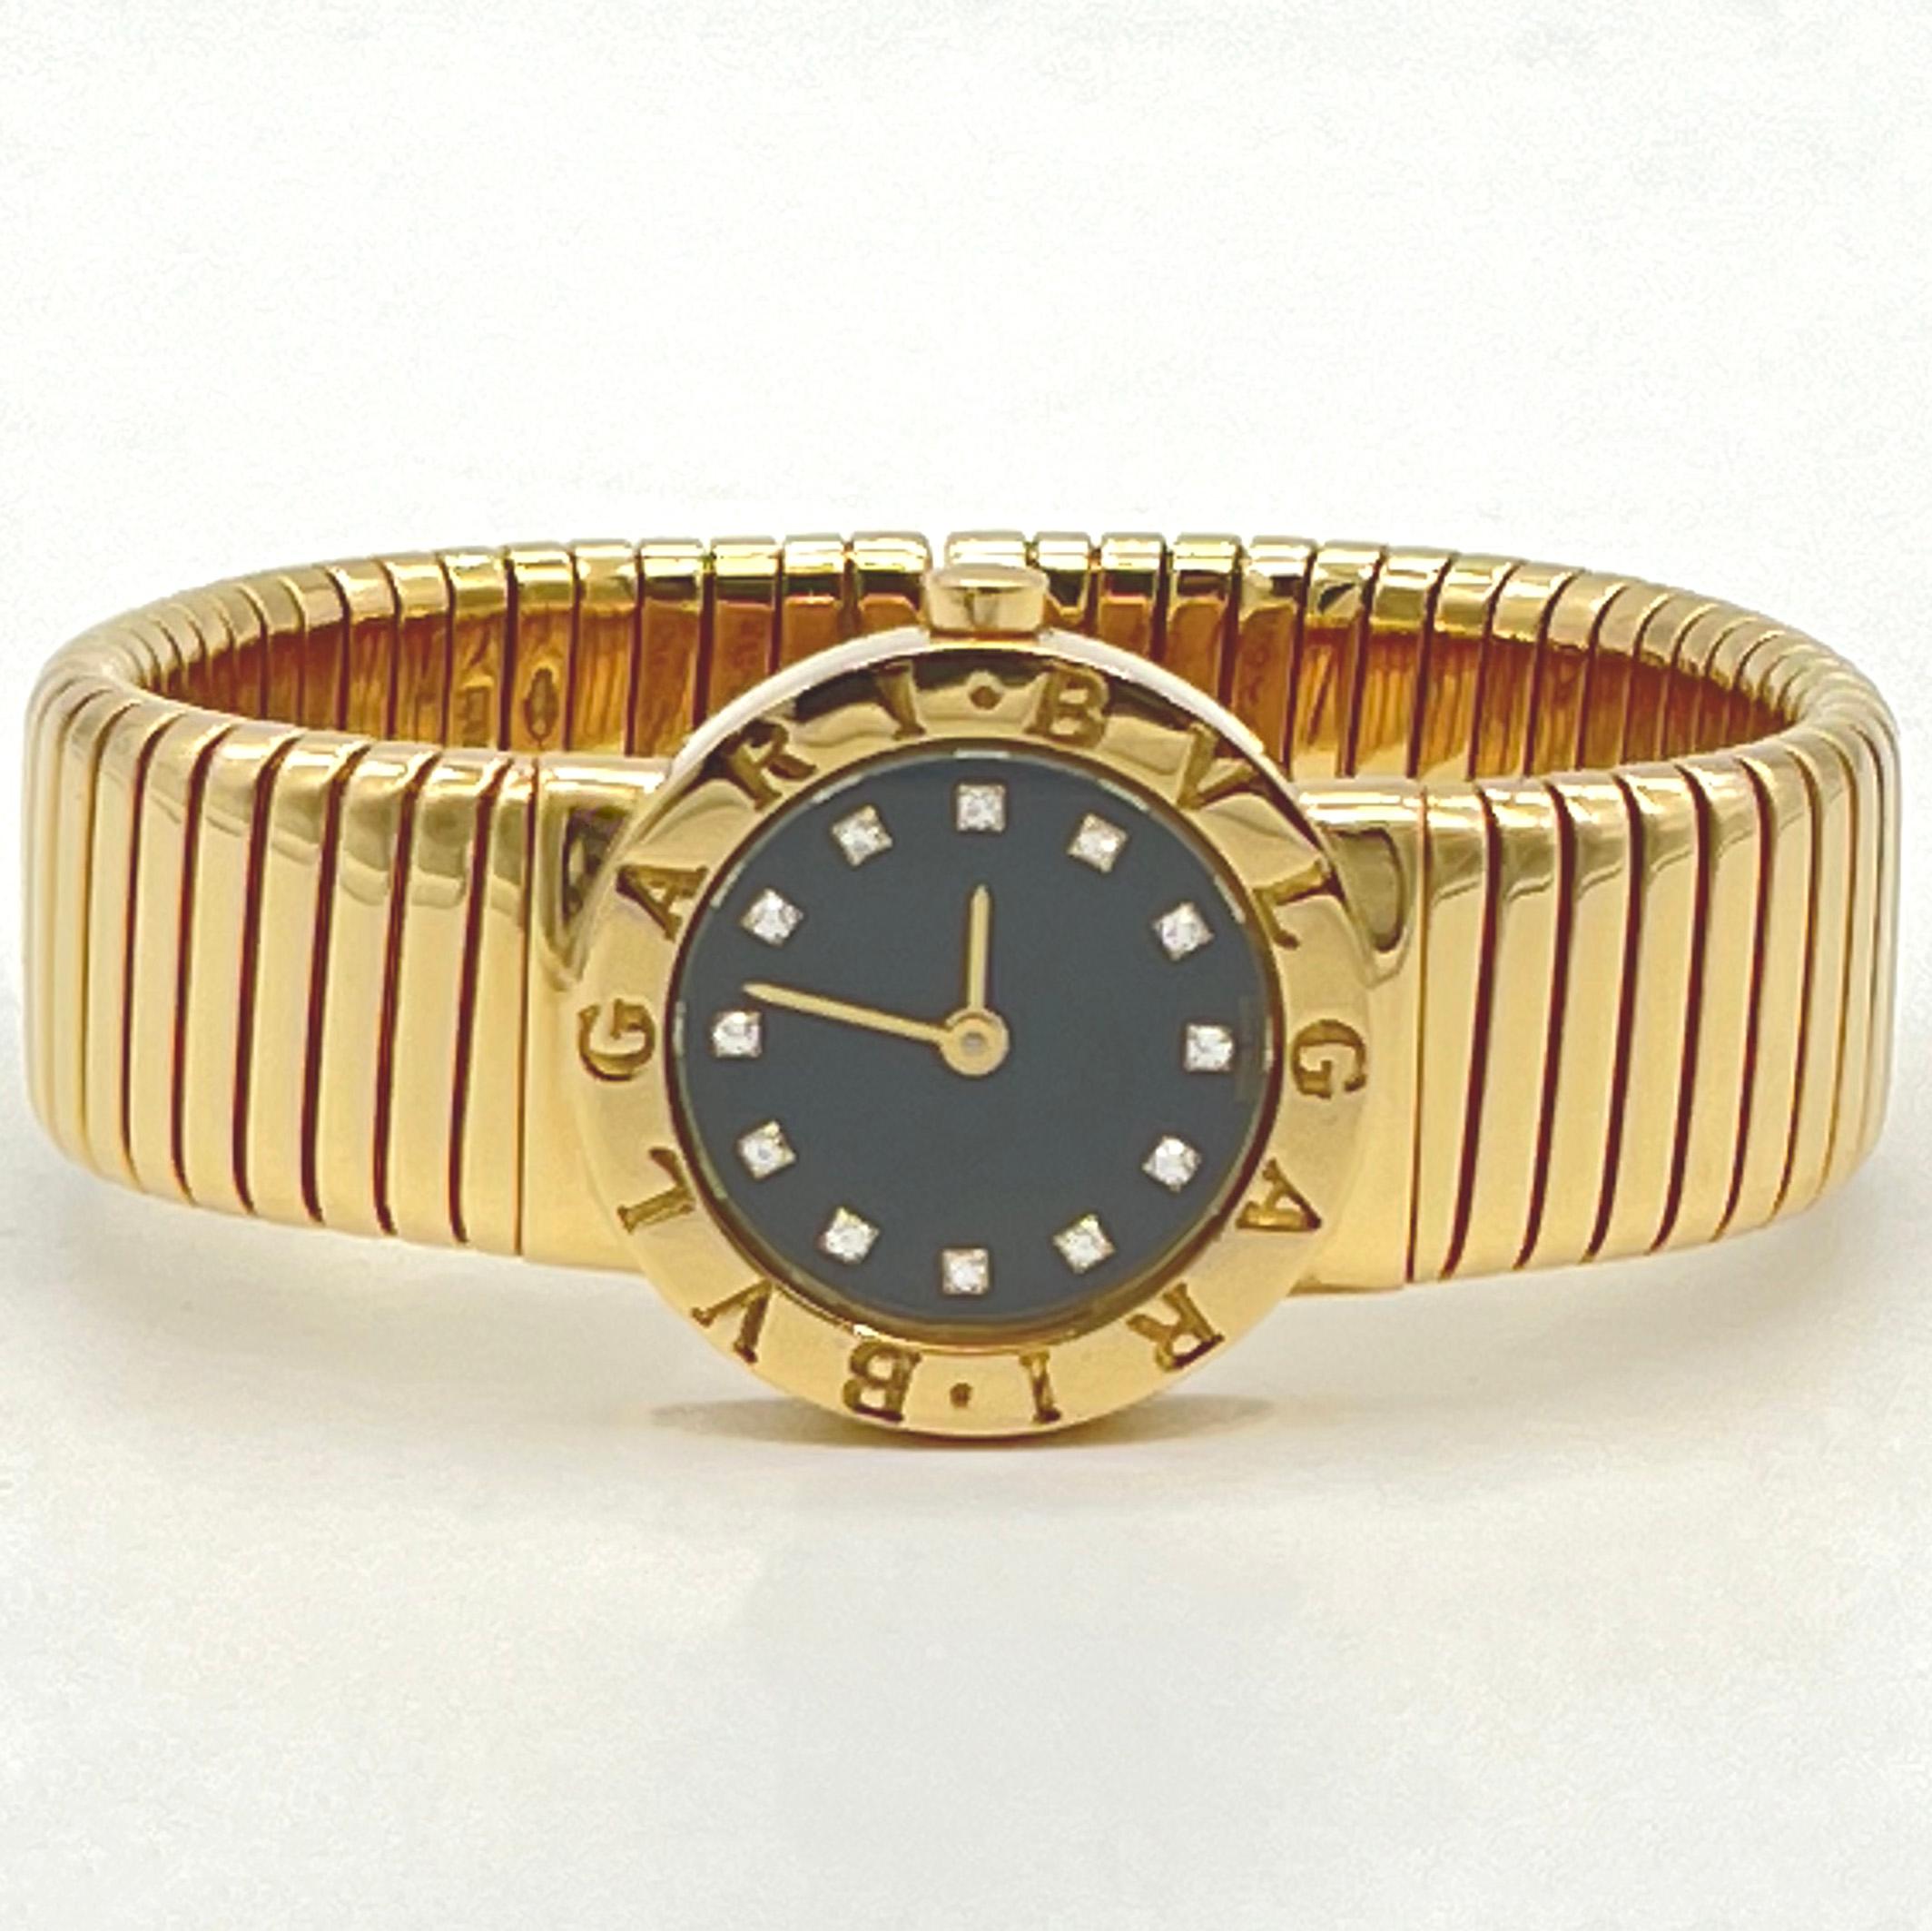 This watch is also known as: BB23, BB232TY, BB, BB232TG

This Bulgari BB23 2T small size Tubogas Bangle in yellow gold is an example of Bulgari successful jewelry making combined with top notch watchmaking techniques. Bulgari BB23 2T small size